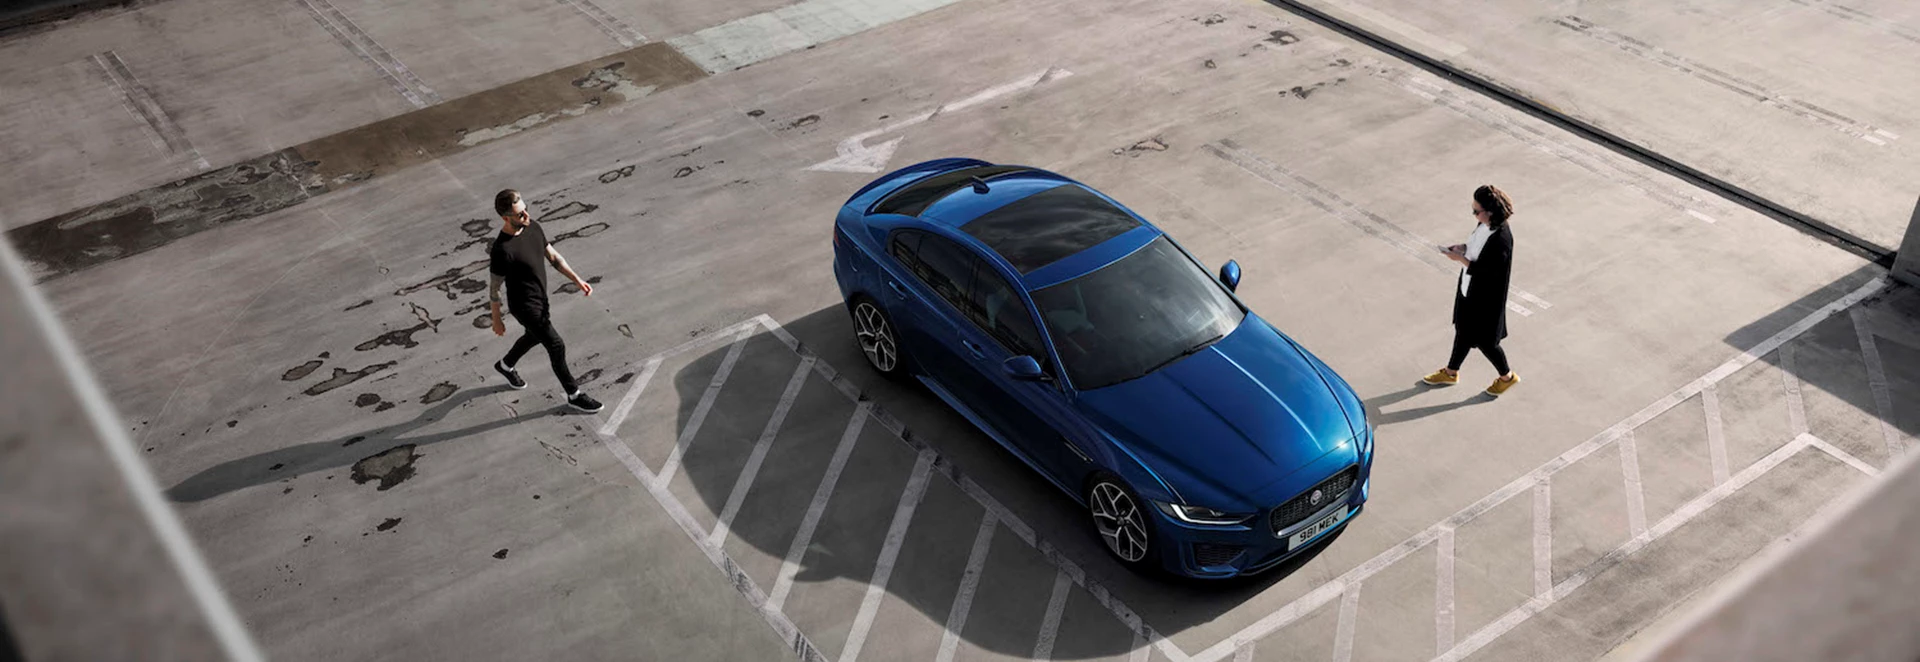 New 2019 Jaguar XE revealed with a great amount of updates 